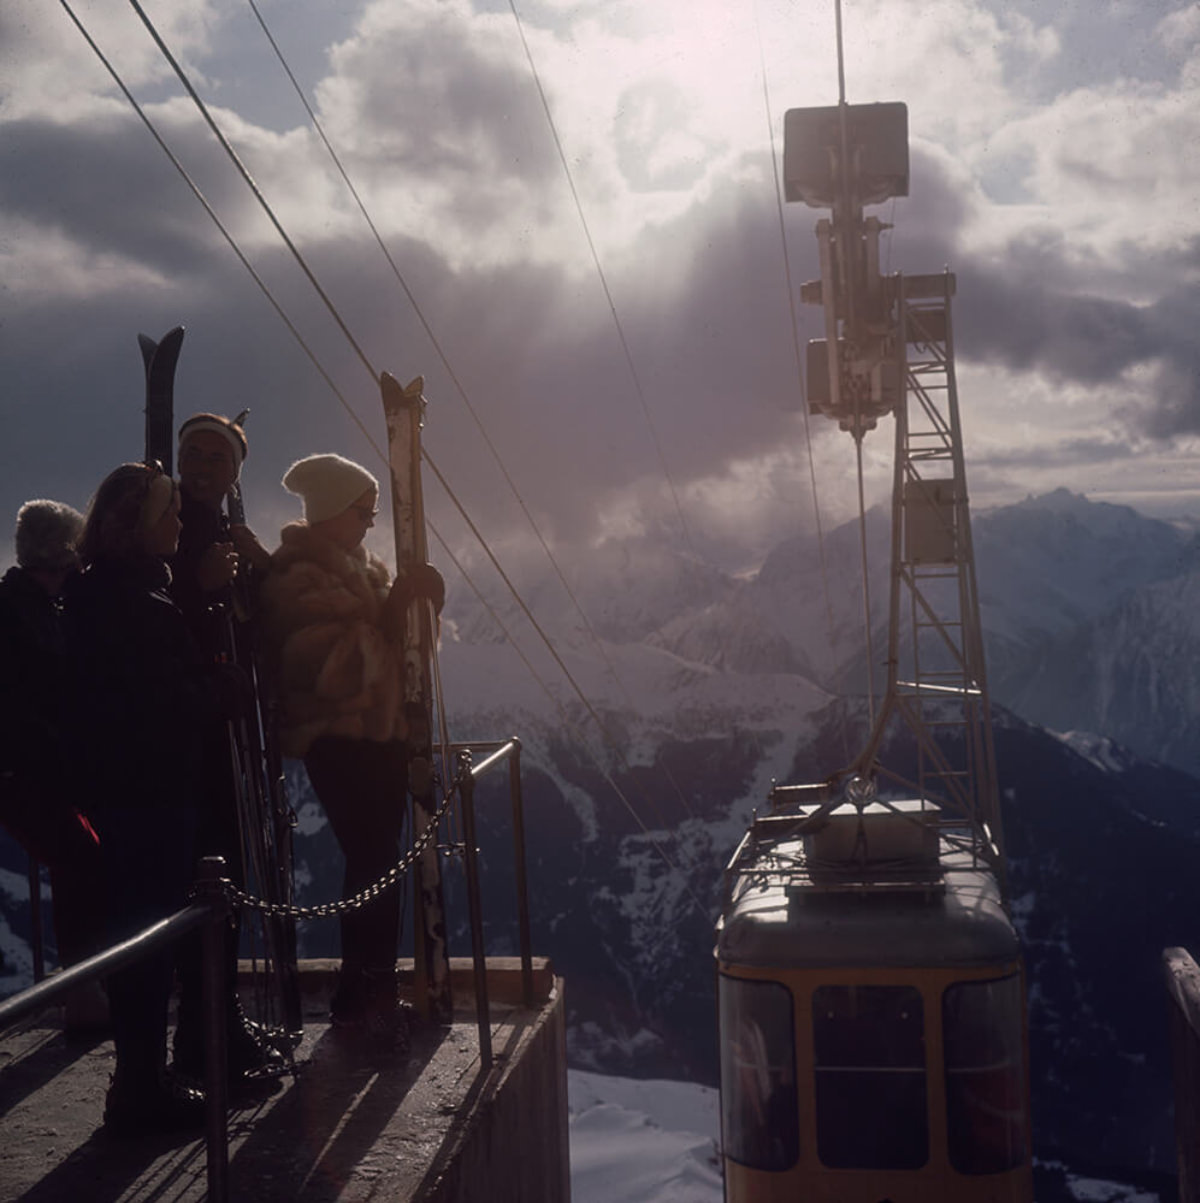 Skiers waiting for the cable car at Verbier in Switzerland, 1964.